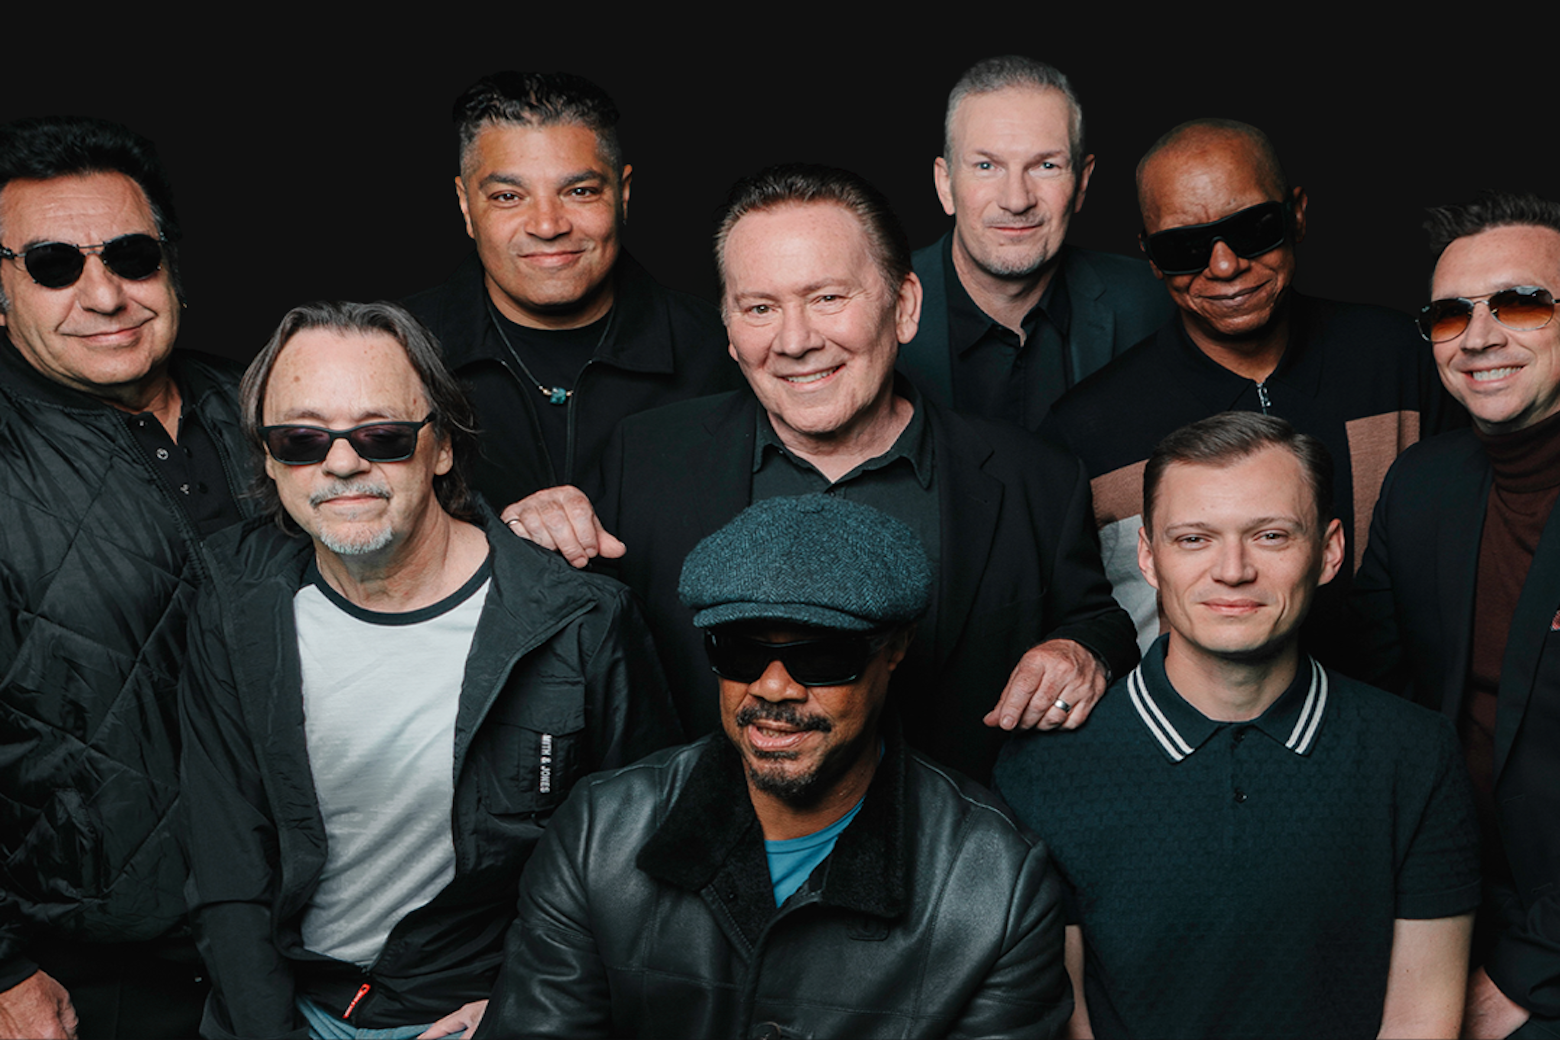 “You can’t help but fall in love with “Red Red Wine!” UB40 brings a summery reggae vibe to the Hollywood Casino